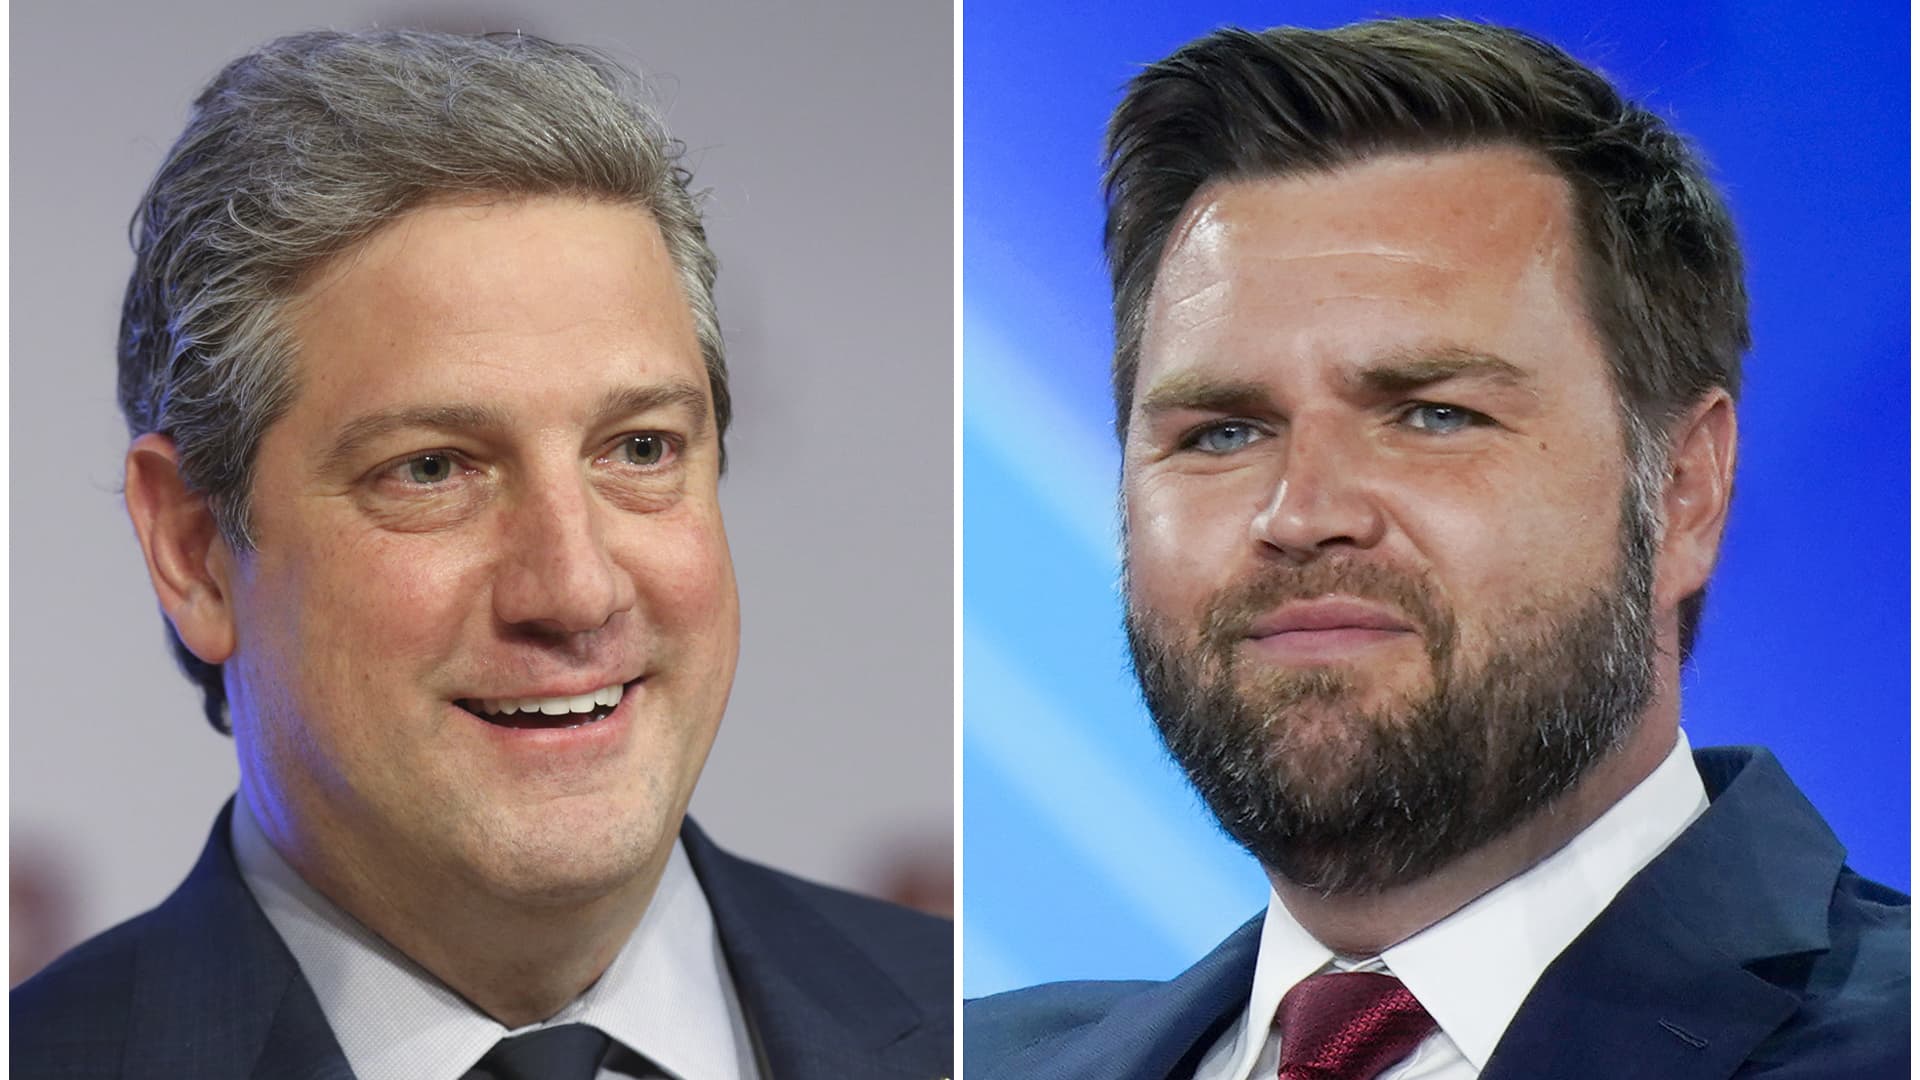 J.D. Vance, Tim Ryan in dead heat in Ohio U.S. Senate race with two weeks until the election, new polls show